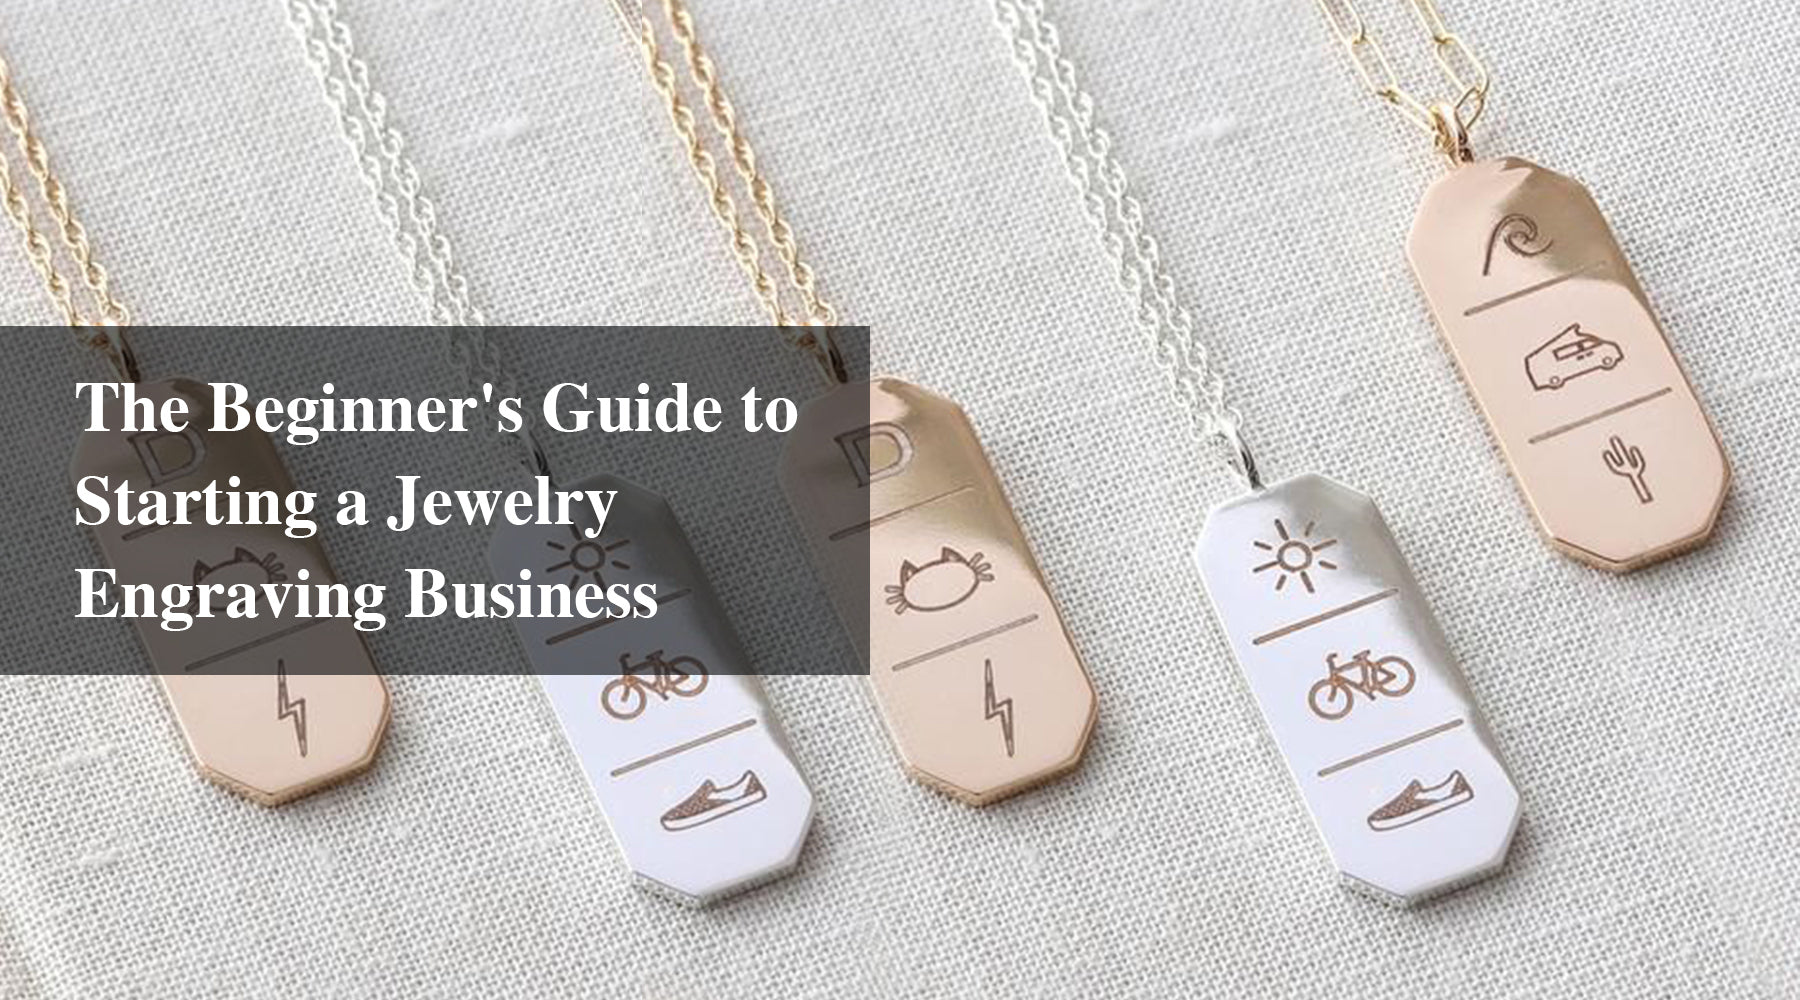 The Beginner's Guide to Starting a Jewelry Engraving Business